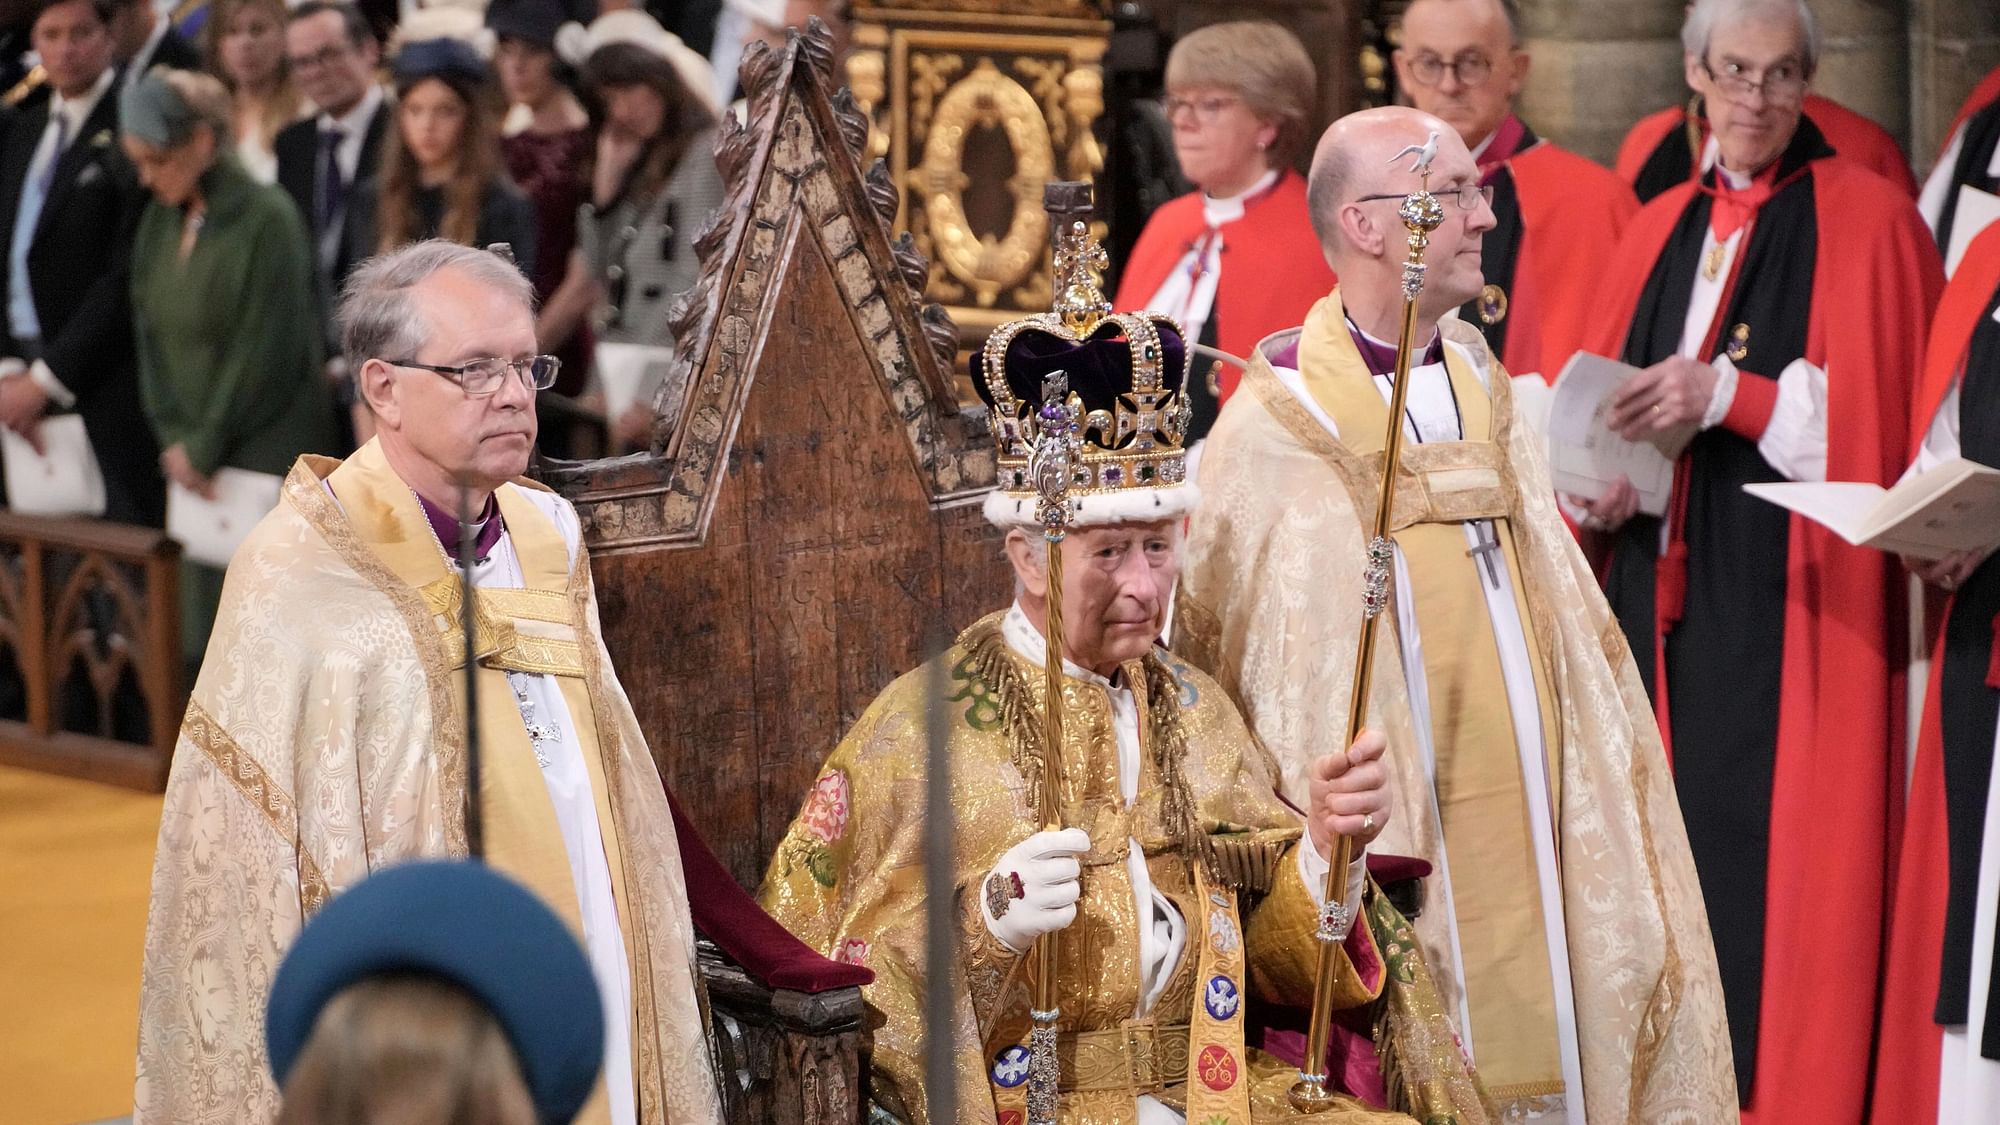 <div class="paragraphs"><p>The main ceremony itself was led by the Archbishop of Canterbury, who placed St Edward's Crown on the King's head, formally making Charles the King of England.</p></div>